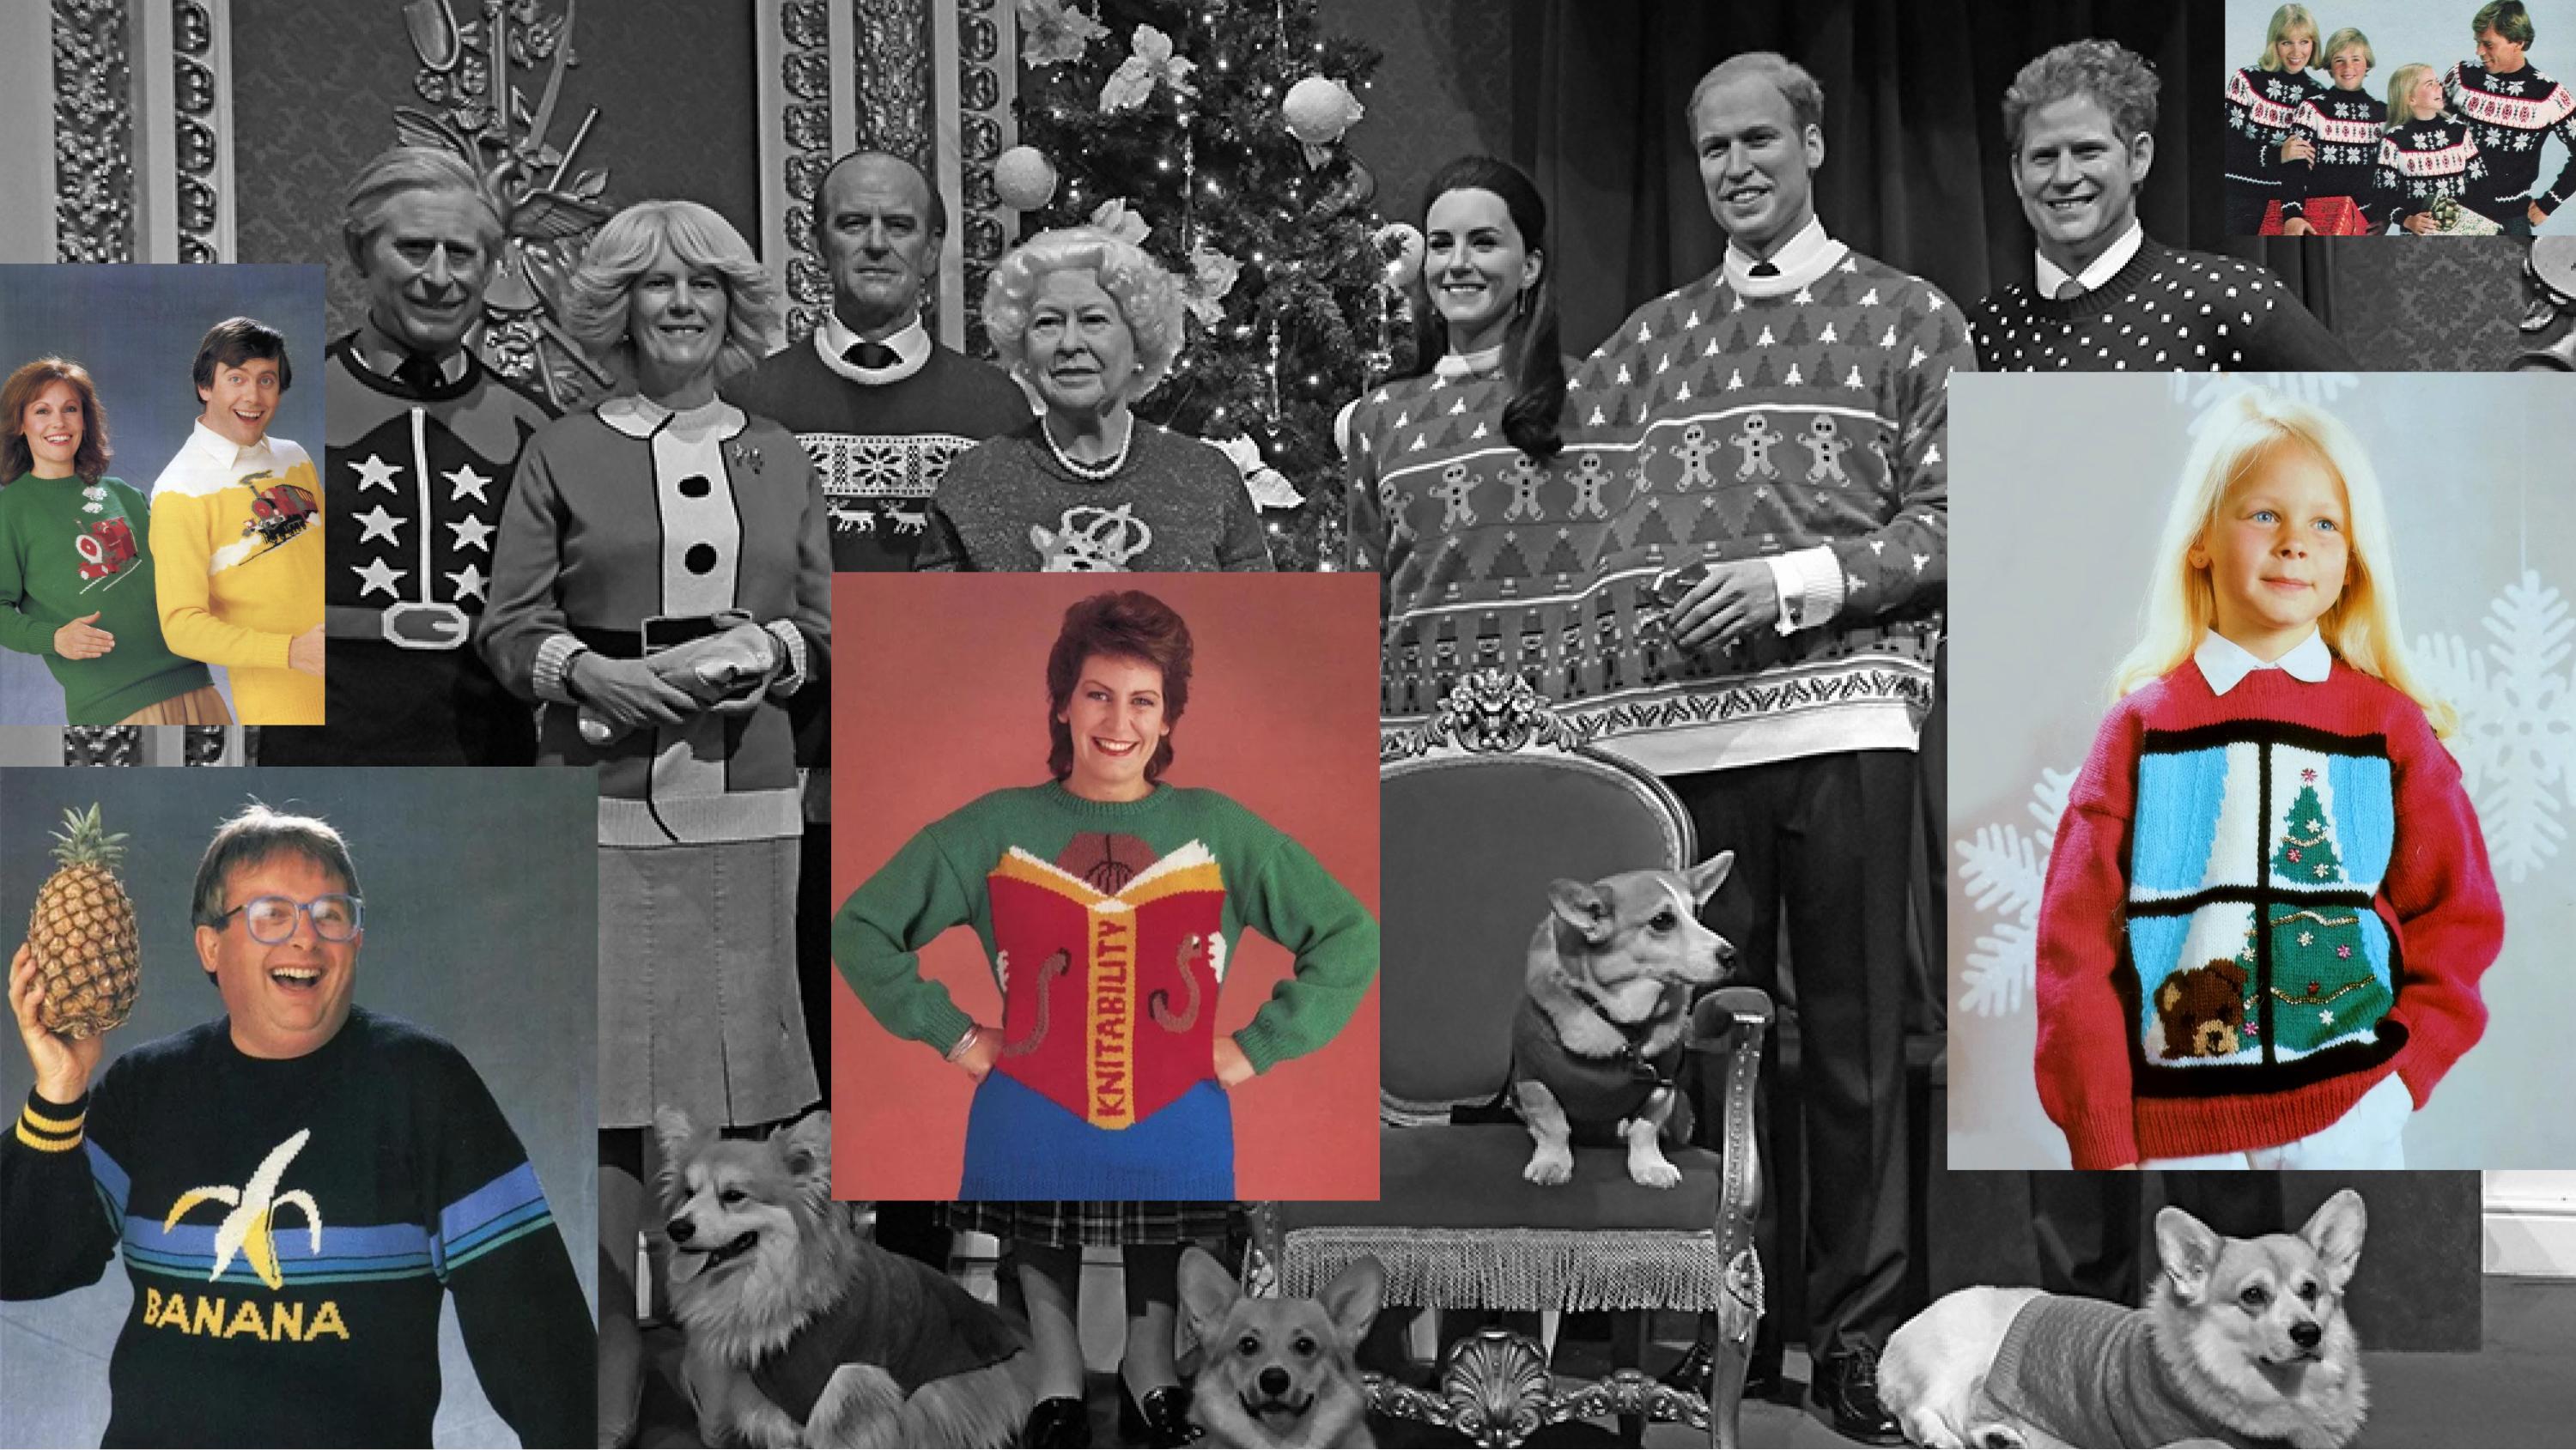 An image showing the 80s fashion of ugly sweaters.